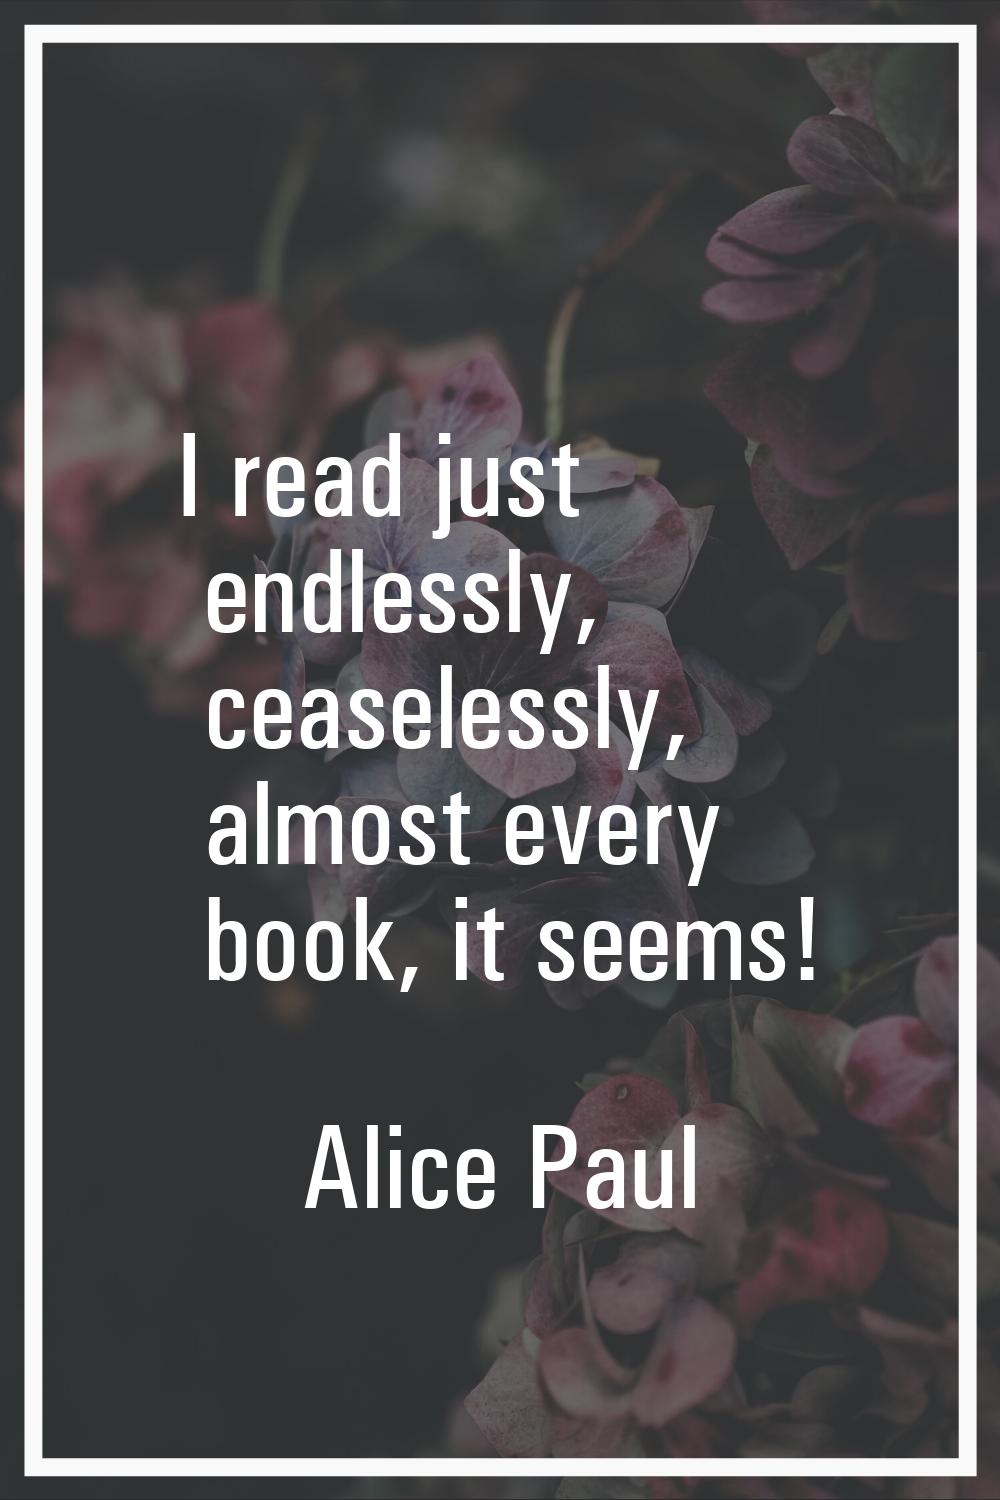 I read just endlessly, ceaselessly, almost every book, it seems!